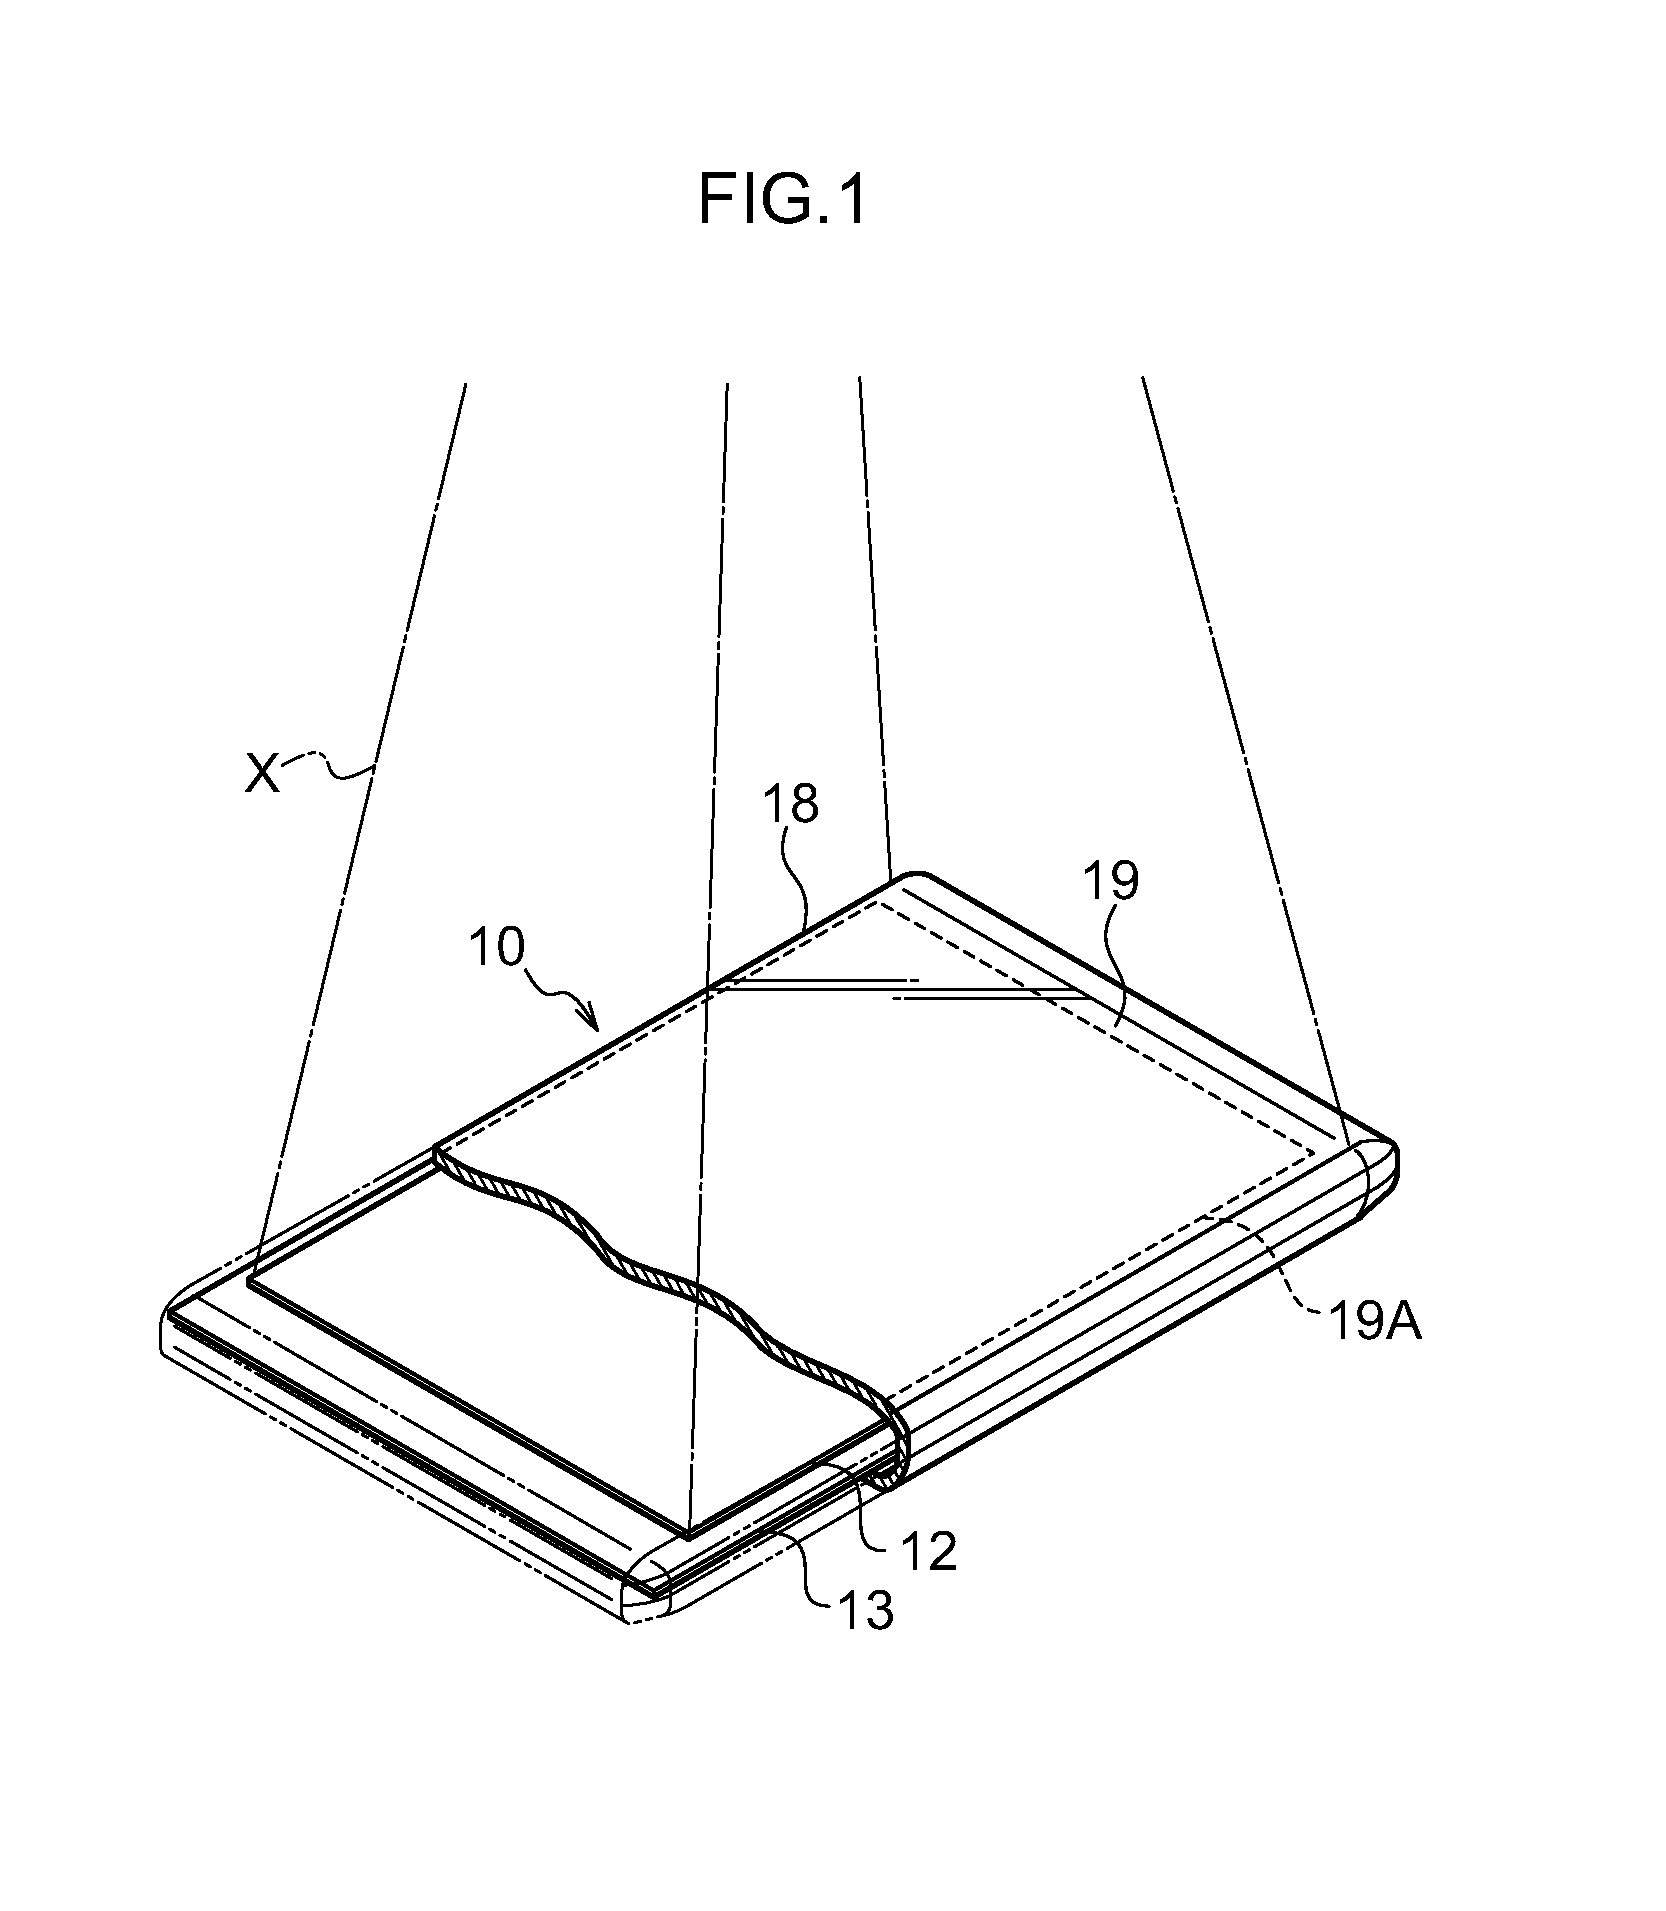 Portable radiographic image capture device